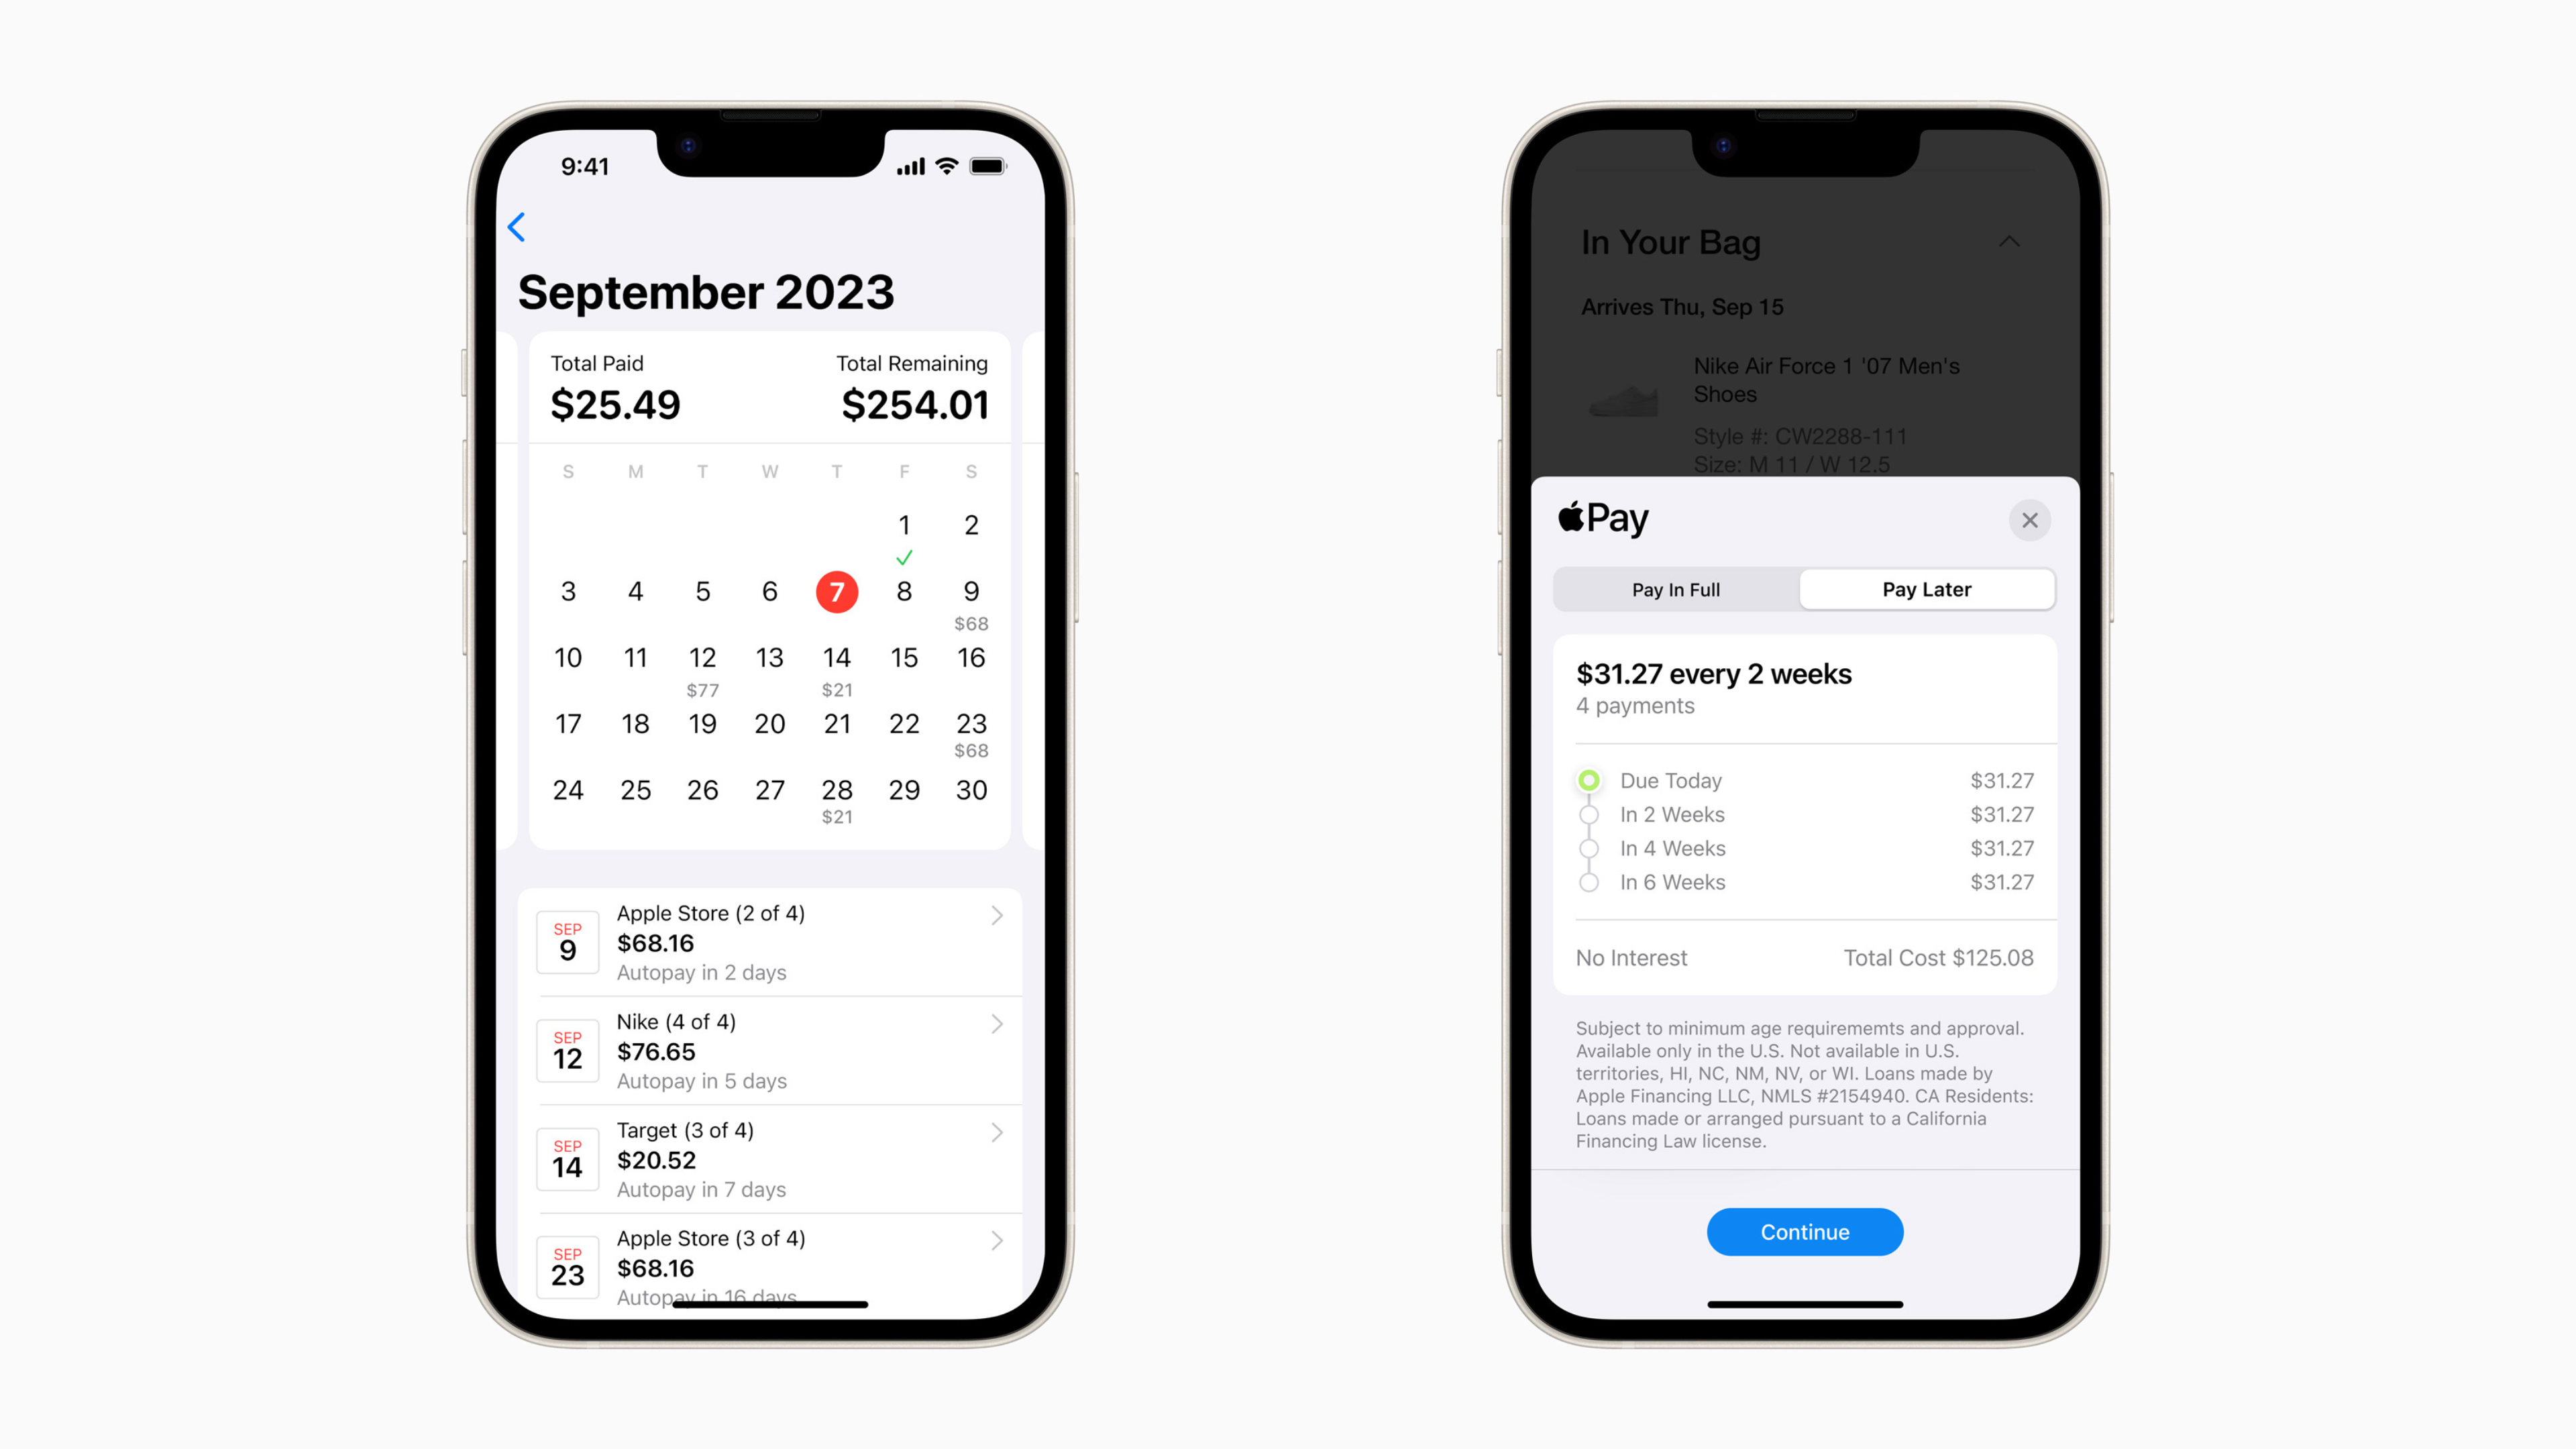 Apple Pay Later Calendar view showing upcoming payments and payment breakdowns